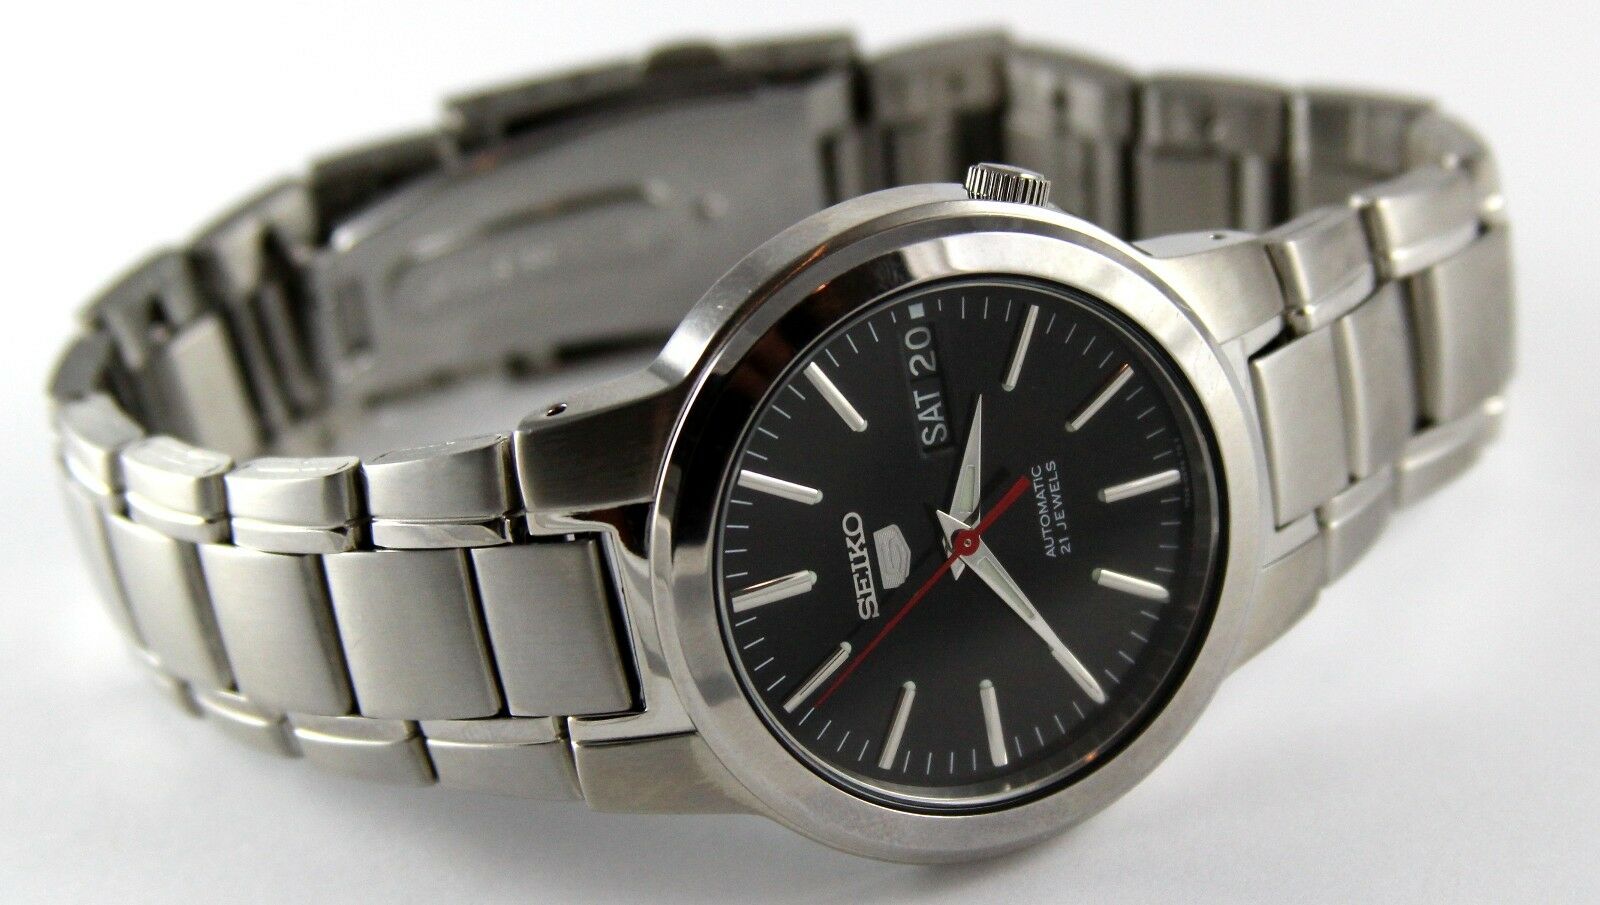 Authentic Seiko 5 Men's Dress Automatic Stainless Steel Analog